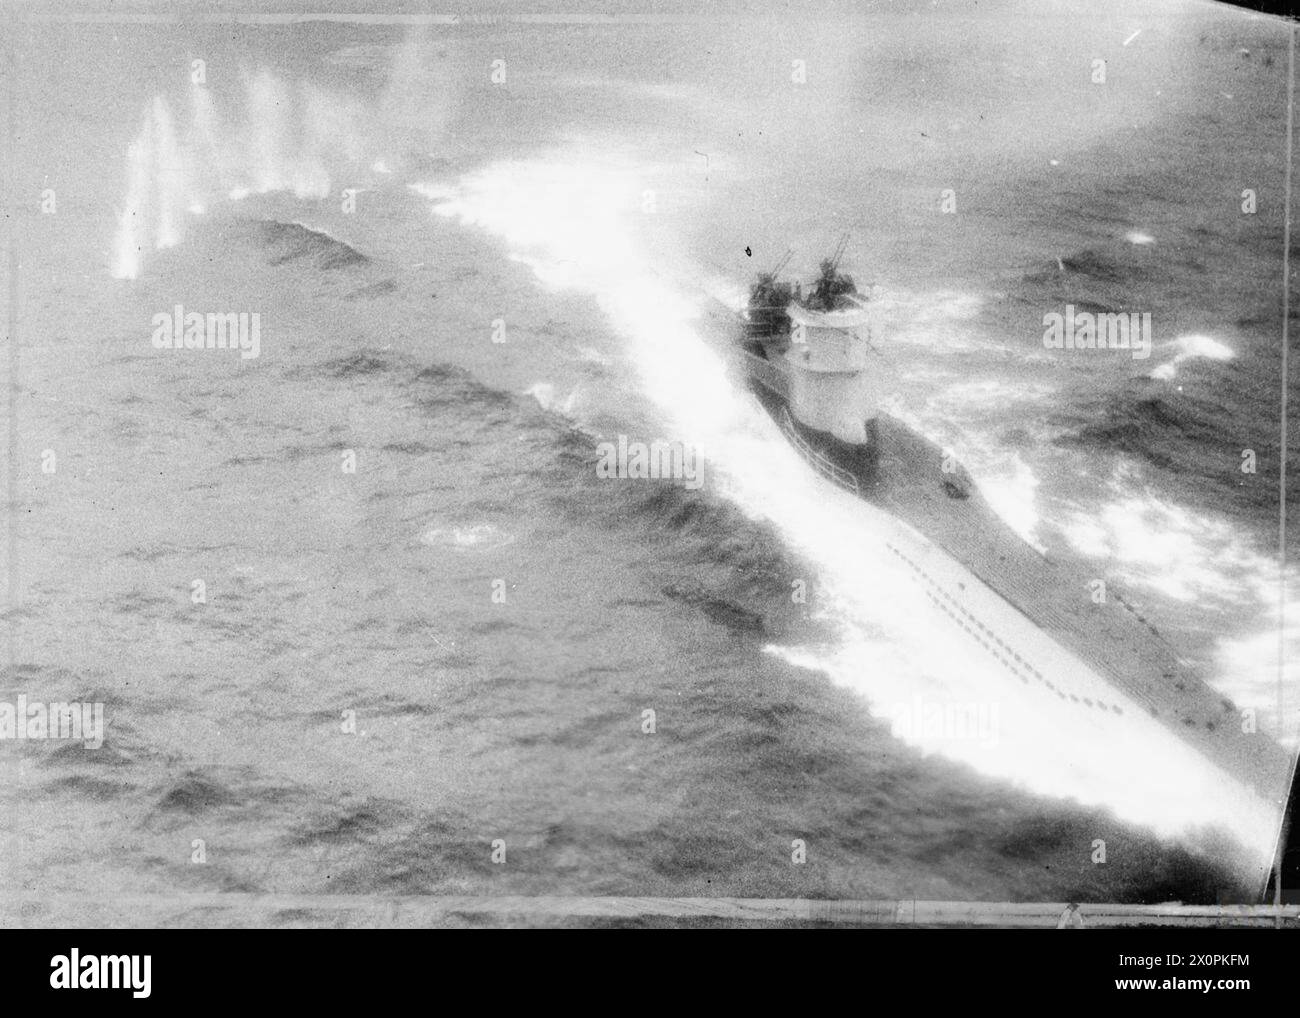 ROYAL AIR FORCE COASTAL COMMAND, 1939-1945. - Oblique photograph taken from Consolidated Catalina Mark IVA, JV928 'Y', of No. 210 Squadron RAF during an attack on German type VIIC submarine U-347 west of the Lofoten Islands. After an initial attack in which the Catalina's depth charges failed to release, the captain, Flying Officer J A Cruickshank, made a second run from astern, through intense fire from the U-boat which killed the Navigator (Flying Officer J.C. Dickson) and seriously wounded Cruickshank and three other members of the crew. The photograph shows the splashes from the first of s Stock Photo